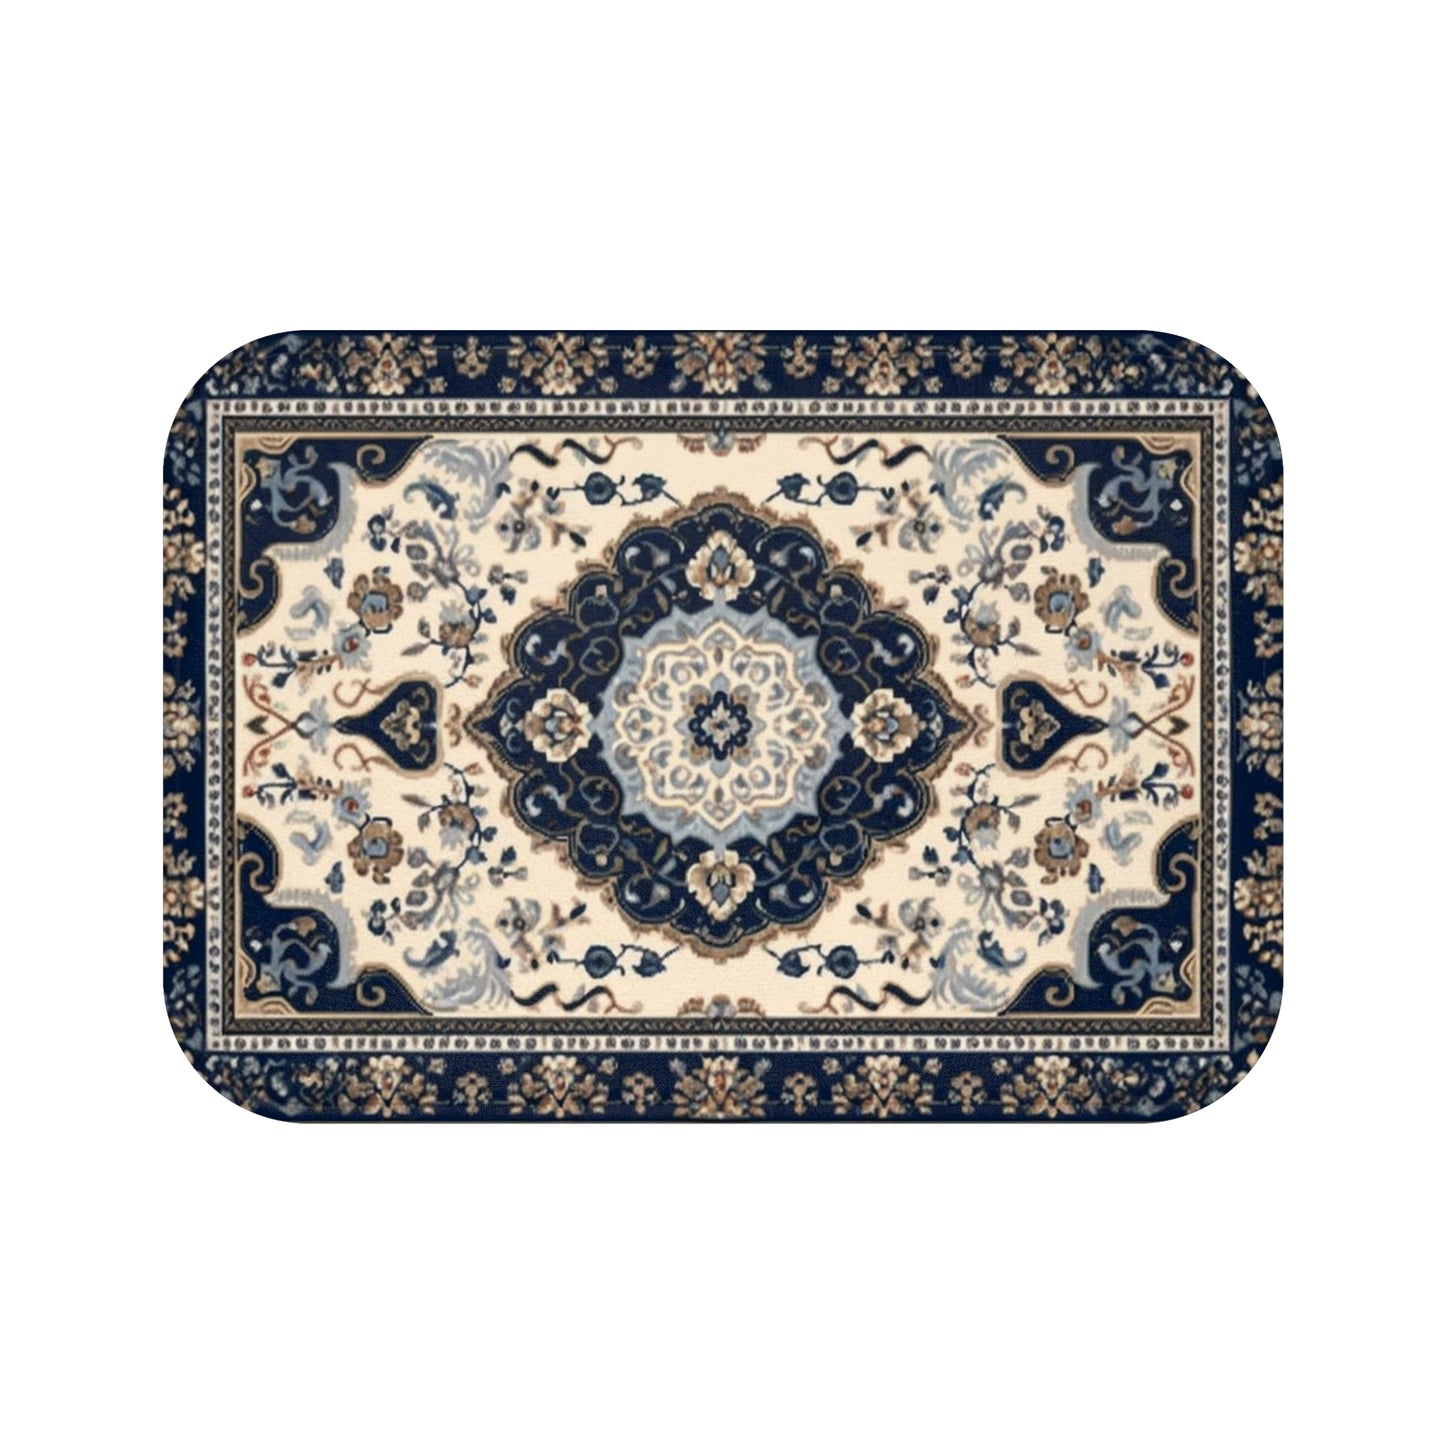 Luxurious Non-Slip Bath Mat - Soft and Absorbent Bathroom Rug for Comfort and Safety